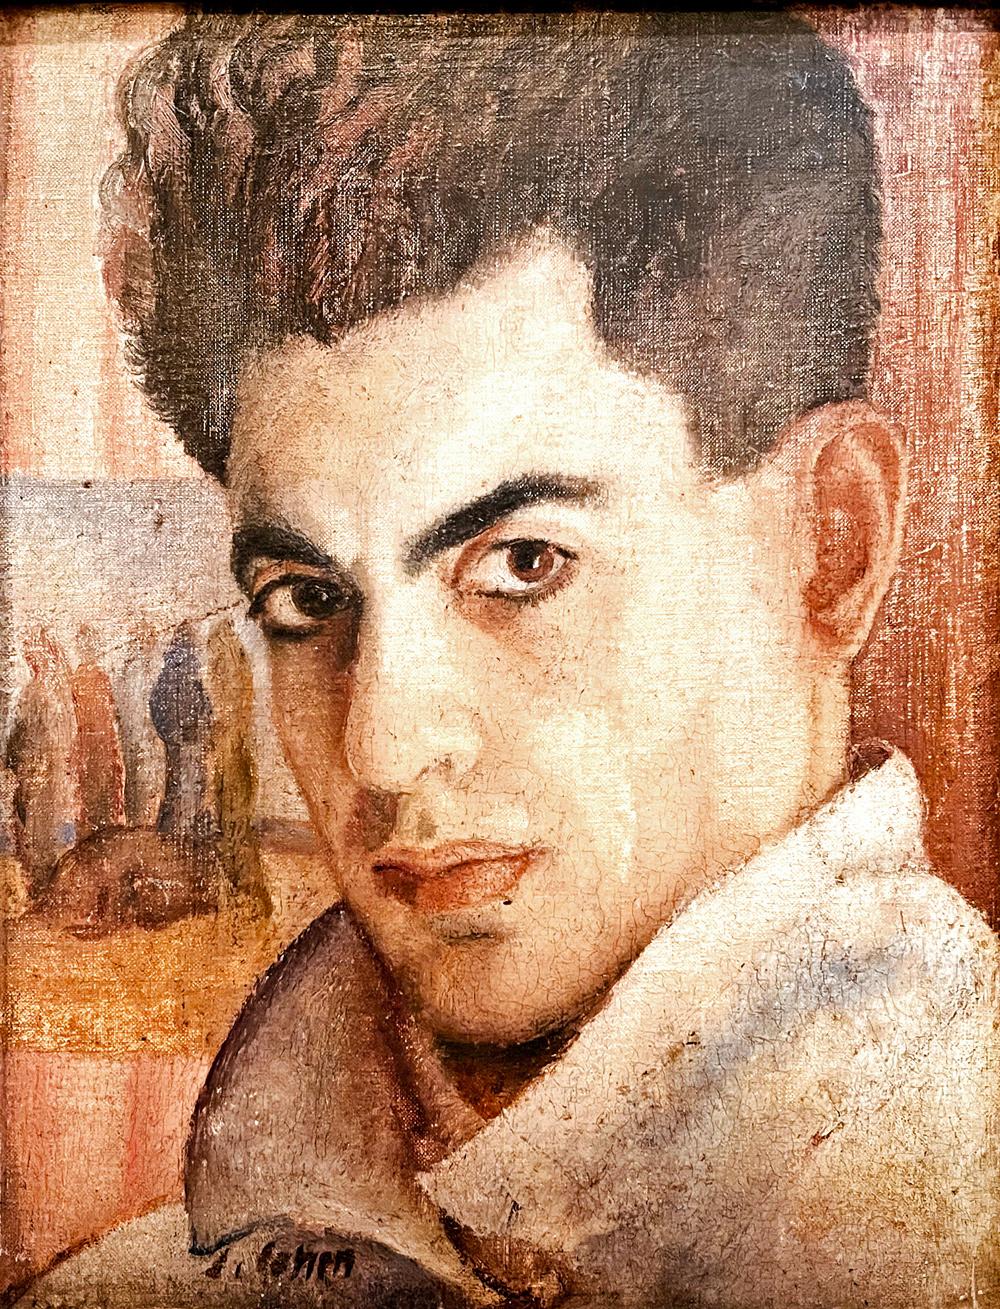 Bold and intense, this portrait -- or perhaps self-portrait -- of a young man with pale skin, dark, flowing hair and a direct stare was painted by T. Cohen in the first decades of the 20th century. He has painted a cluster of figures and an animal